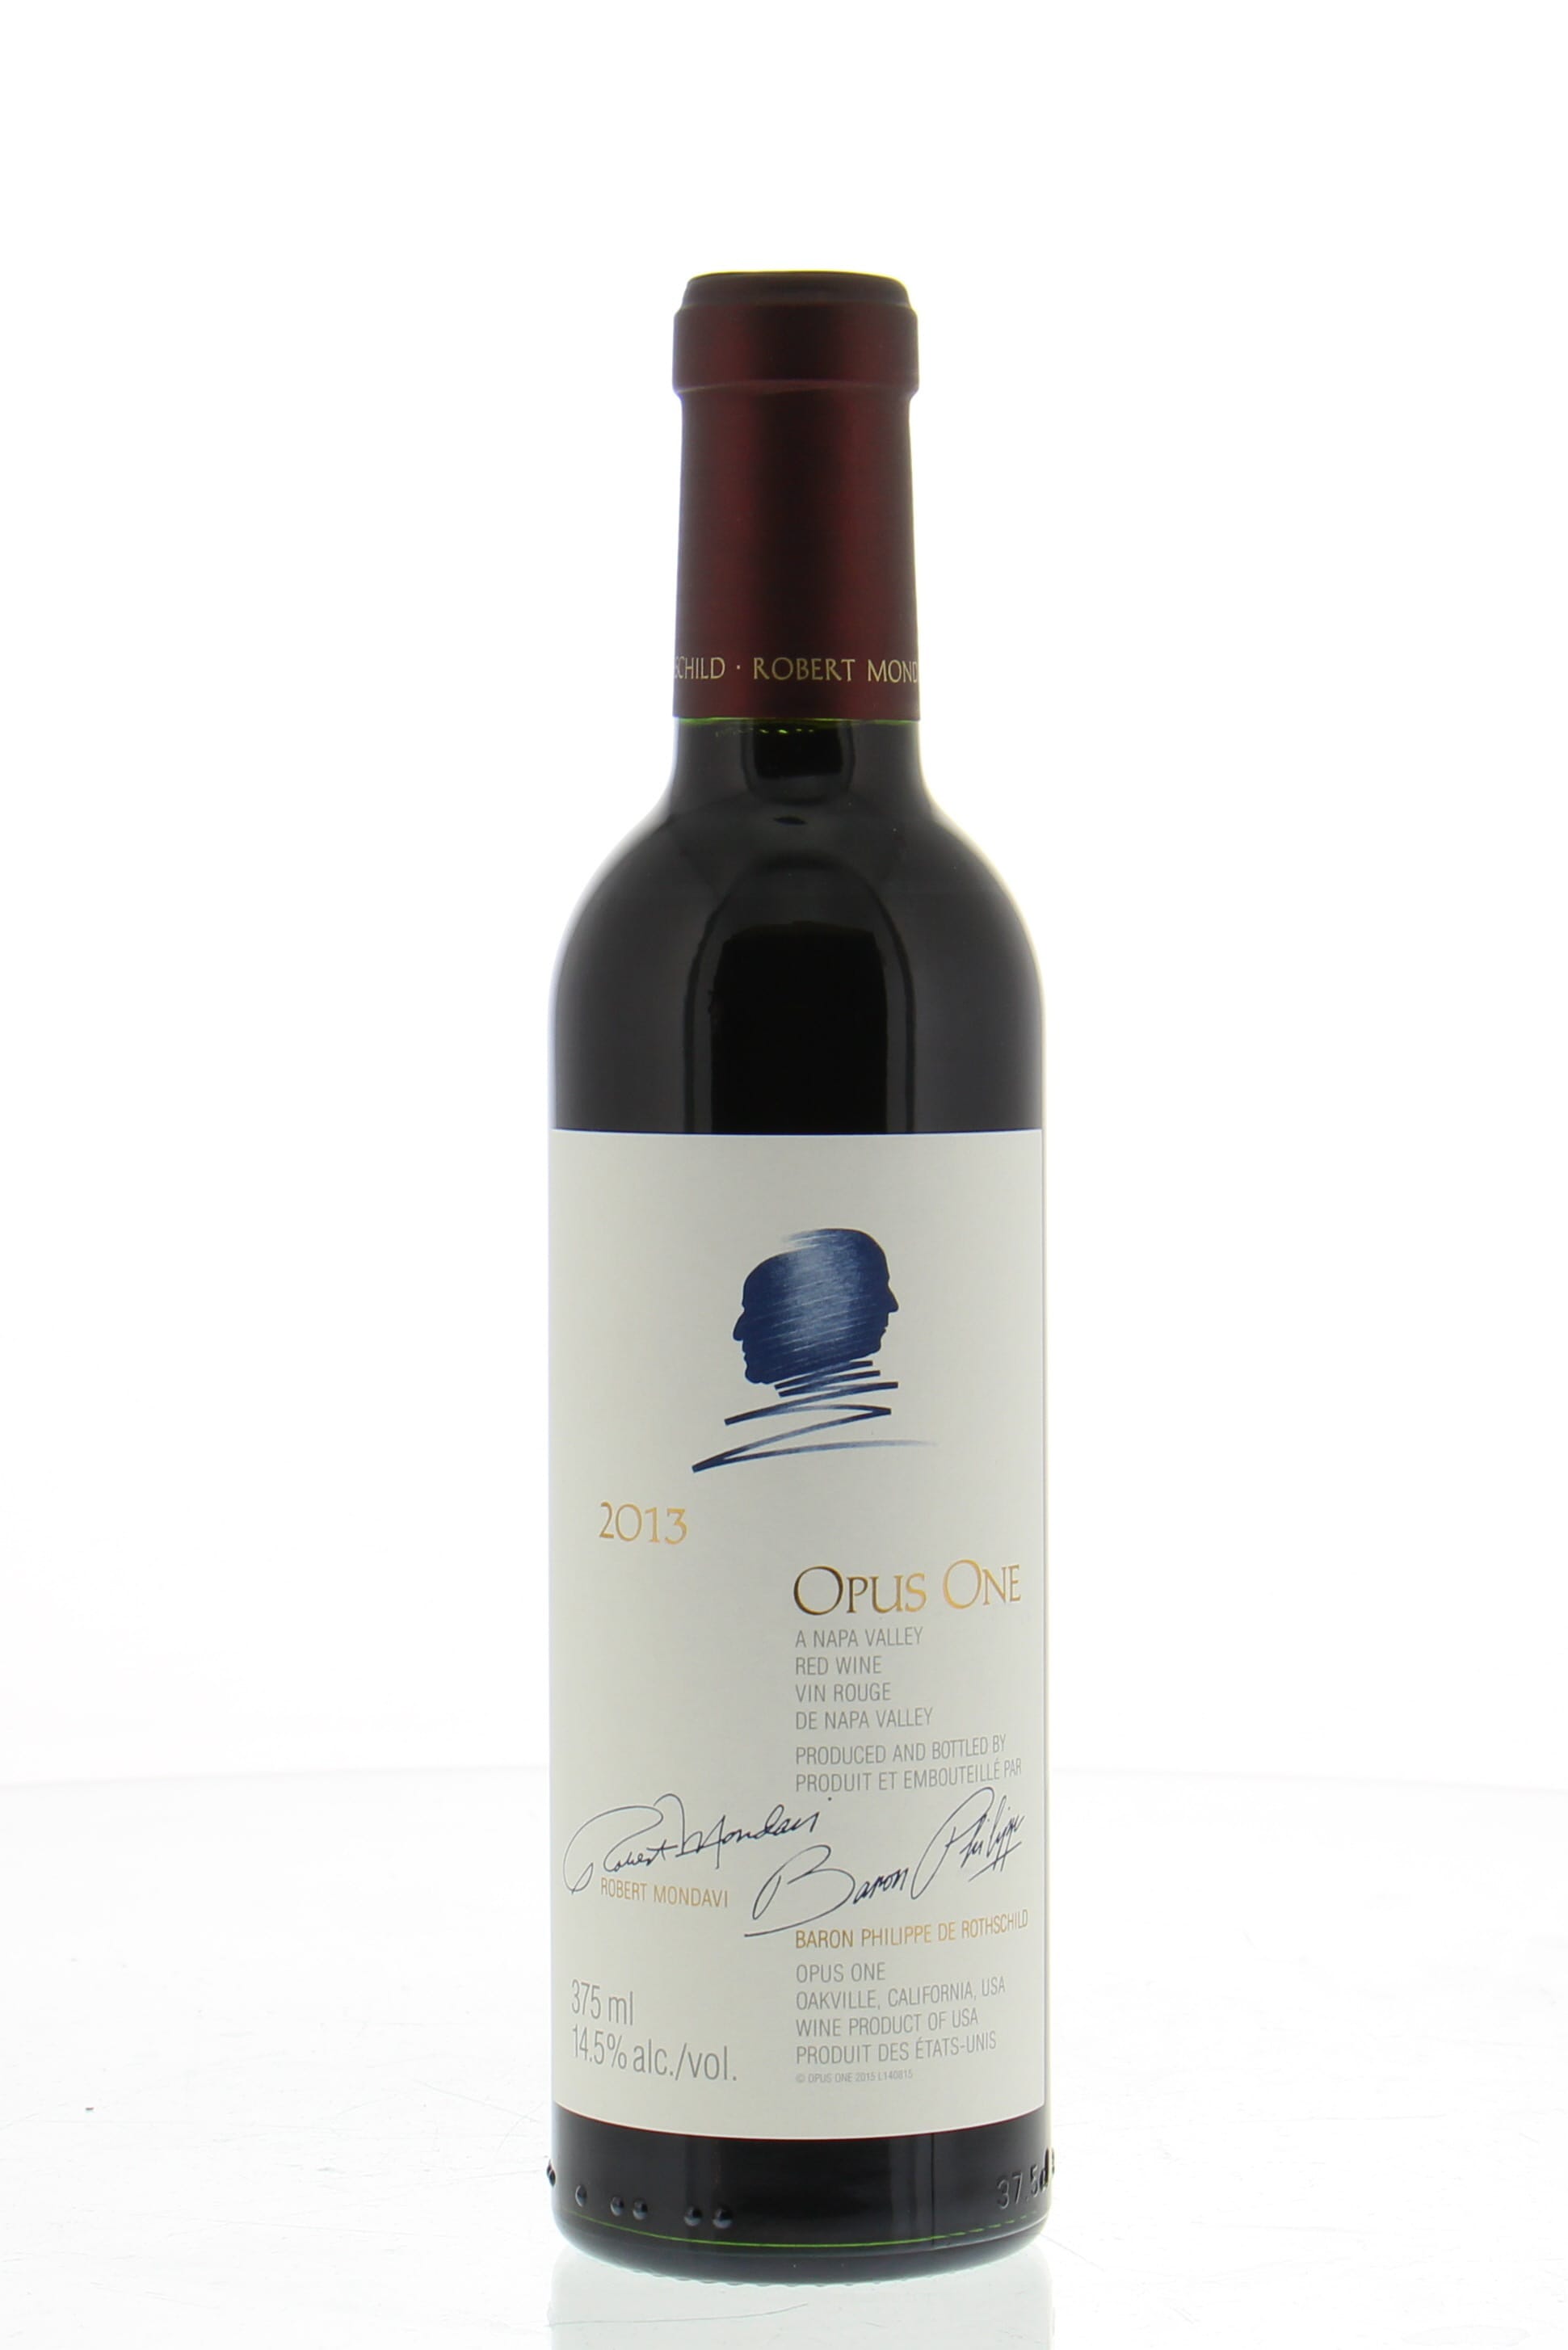 Opus One - Proprietary Red Wine 2013 Perfect